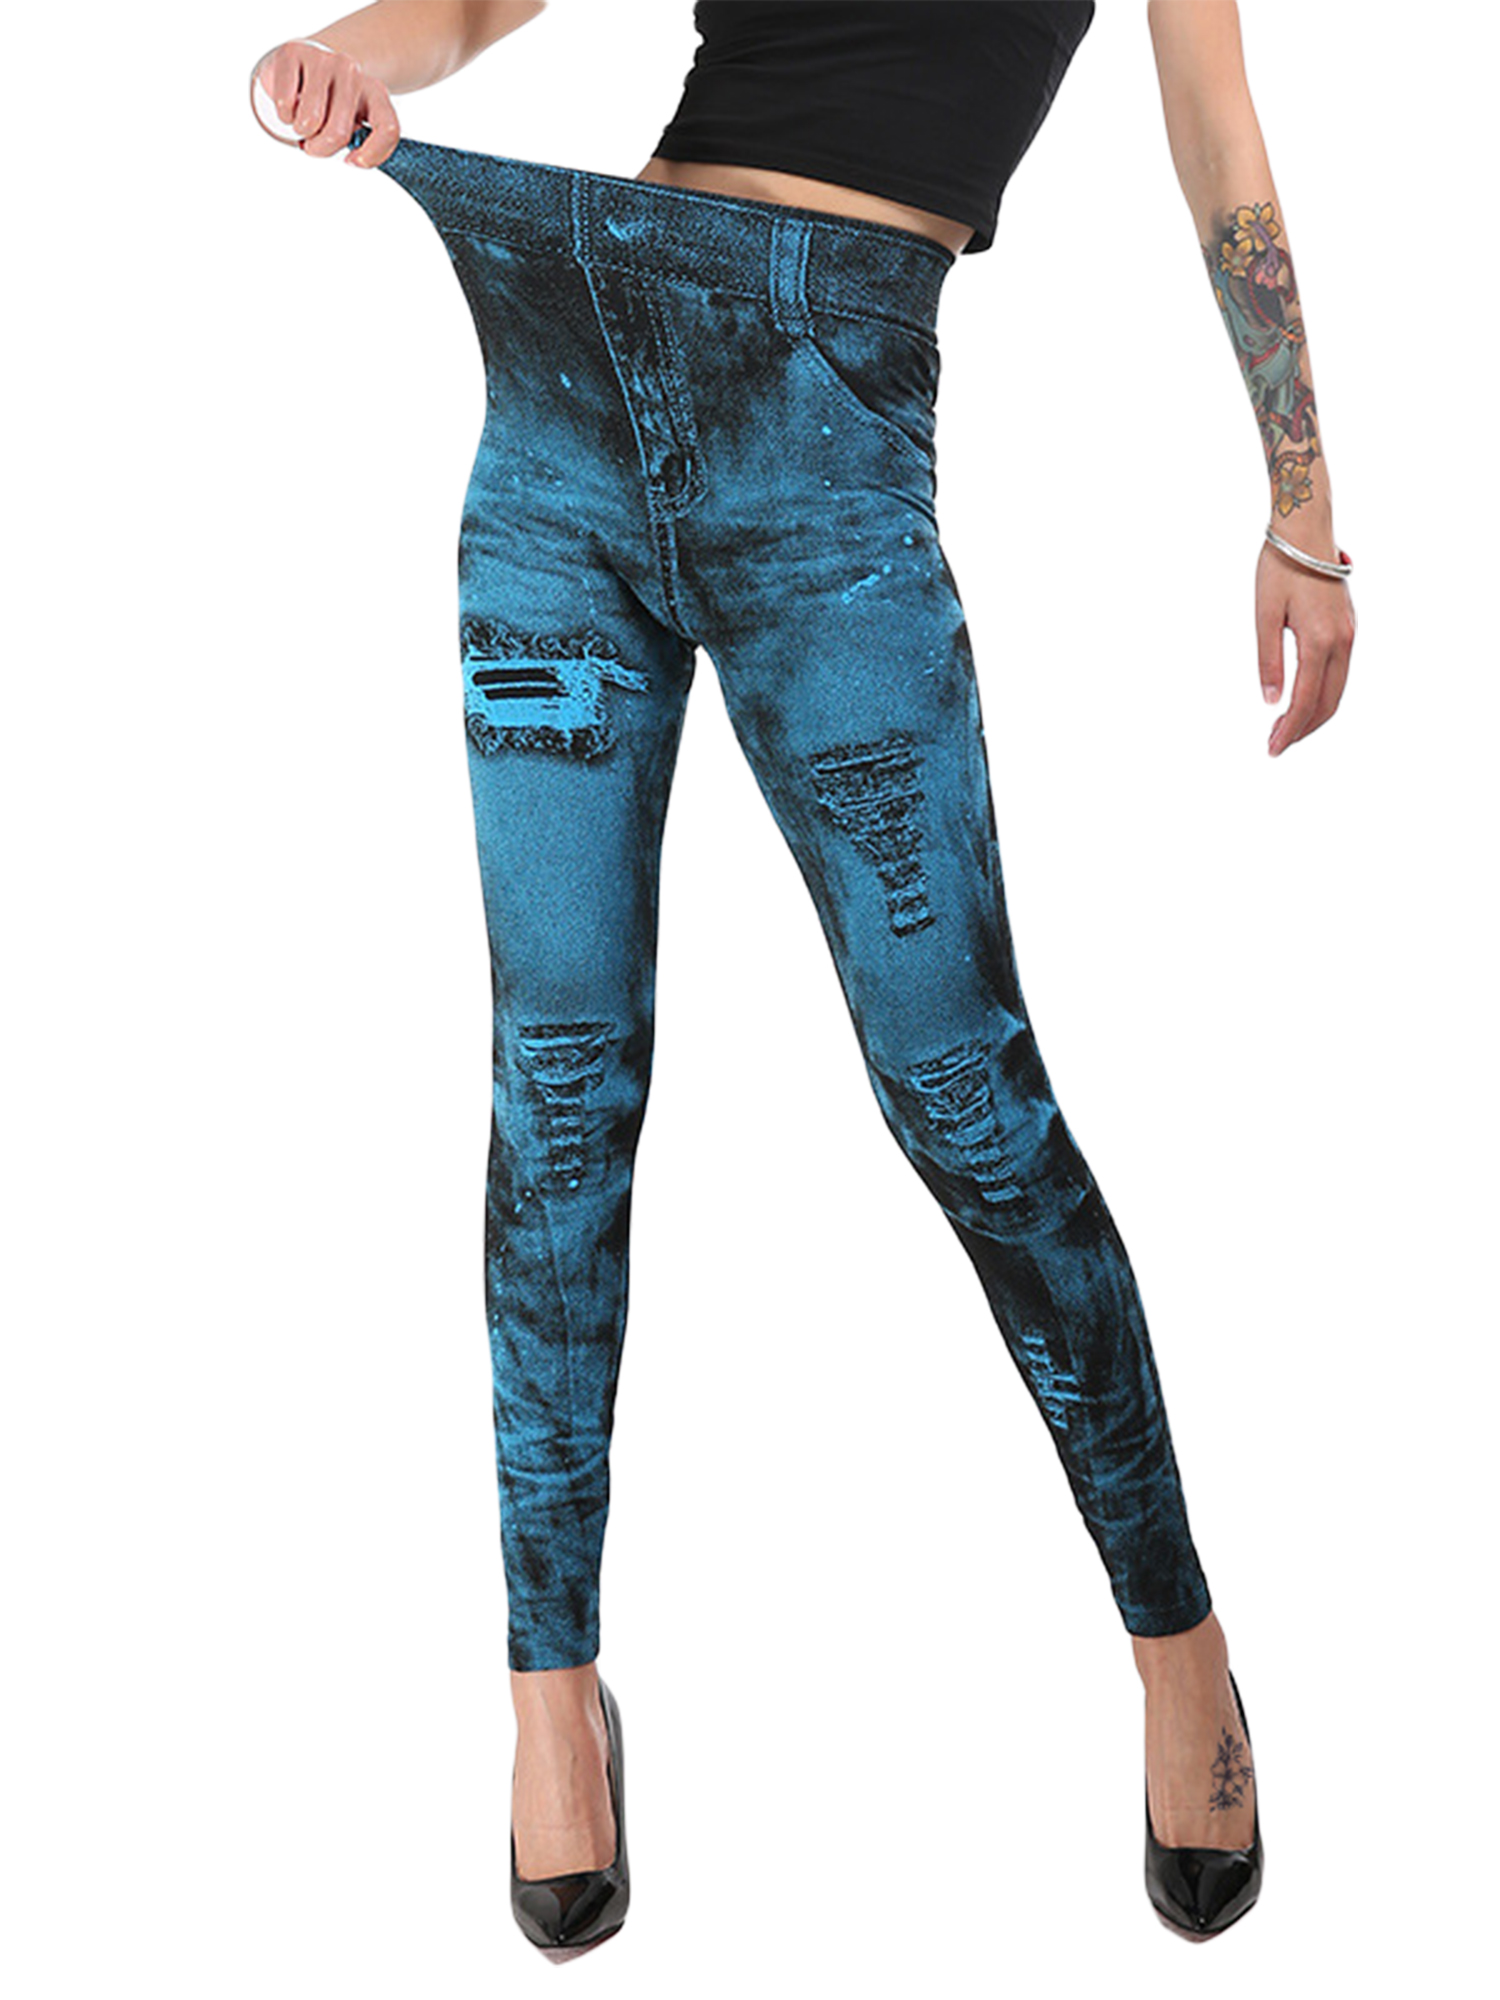 Ladies Skinny Jeans Stretch Jeans High Waisted Leggings Denim Print Distressed Jeans For Women Seamless Full Length Pencil Pants - image 3 of 4